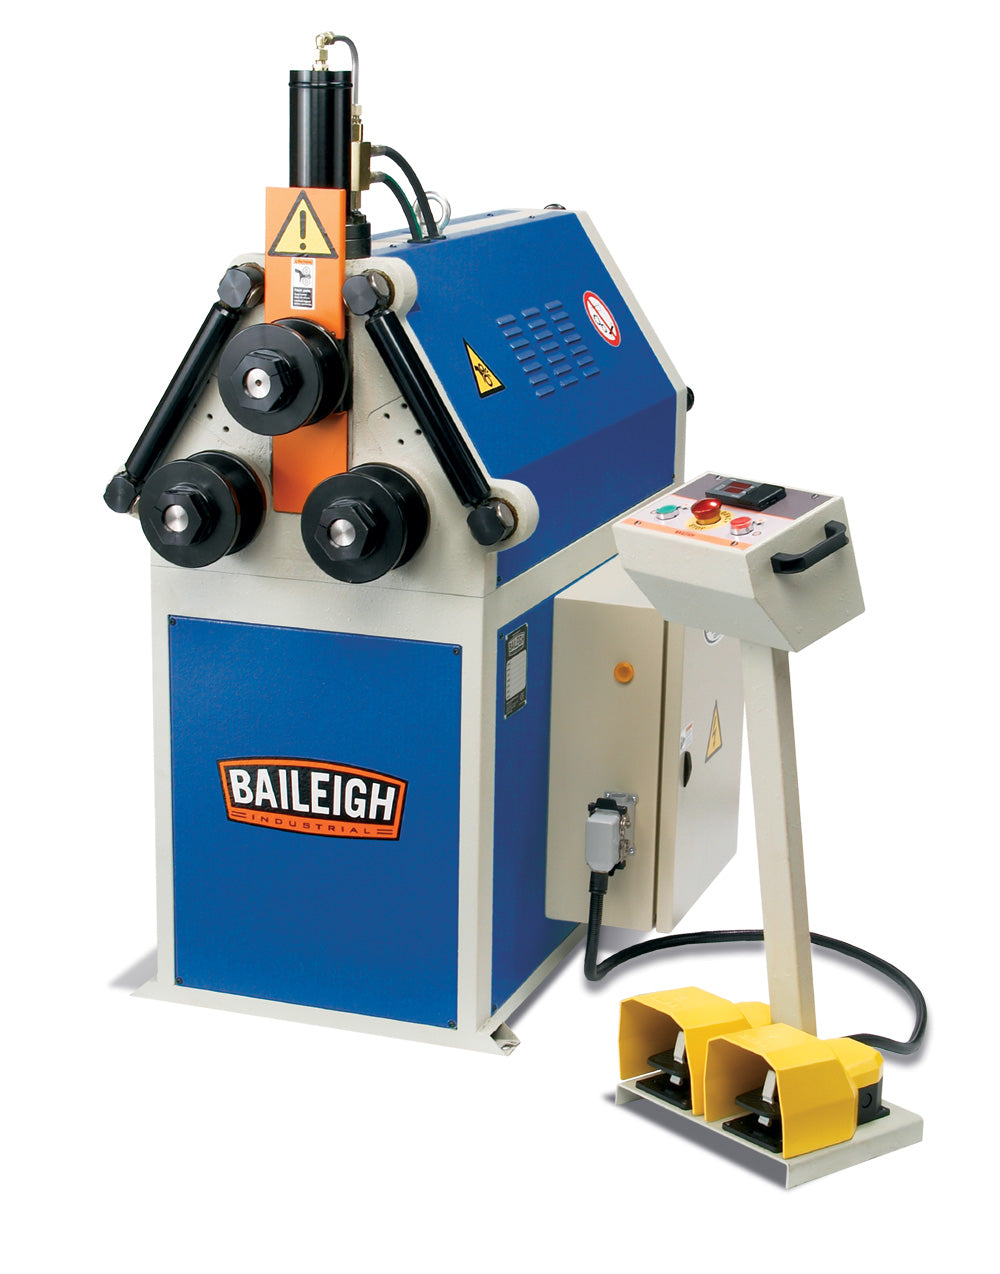 Baileigh R-H45 220V 1 Phase 60 Htz Roll Bender with Hydraulic Movement for the Top Roll